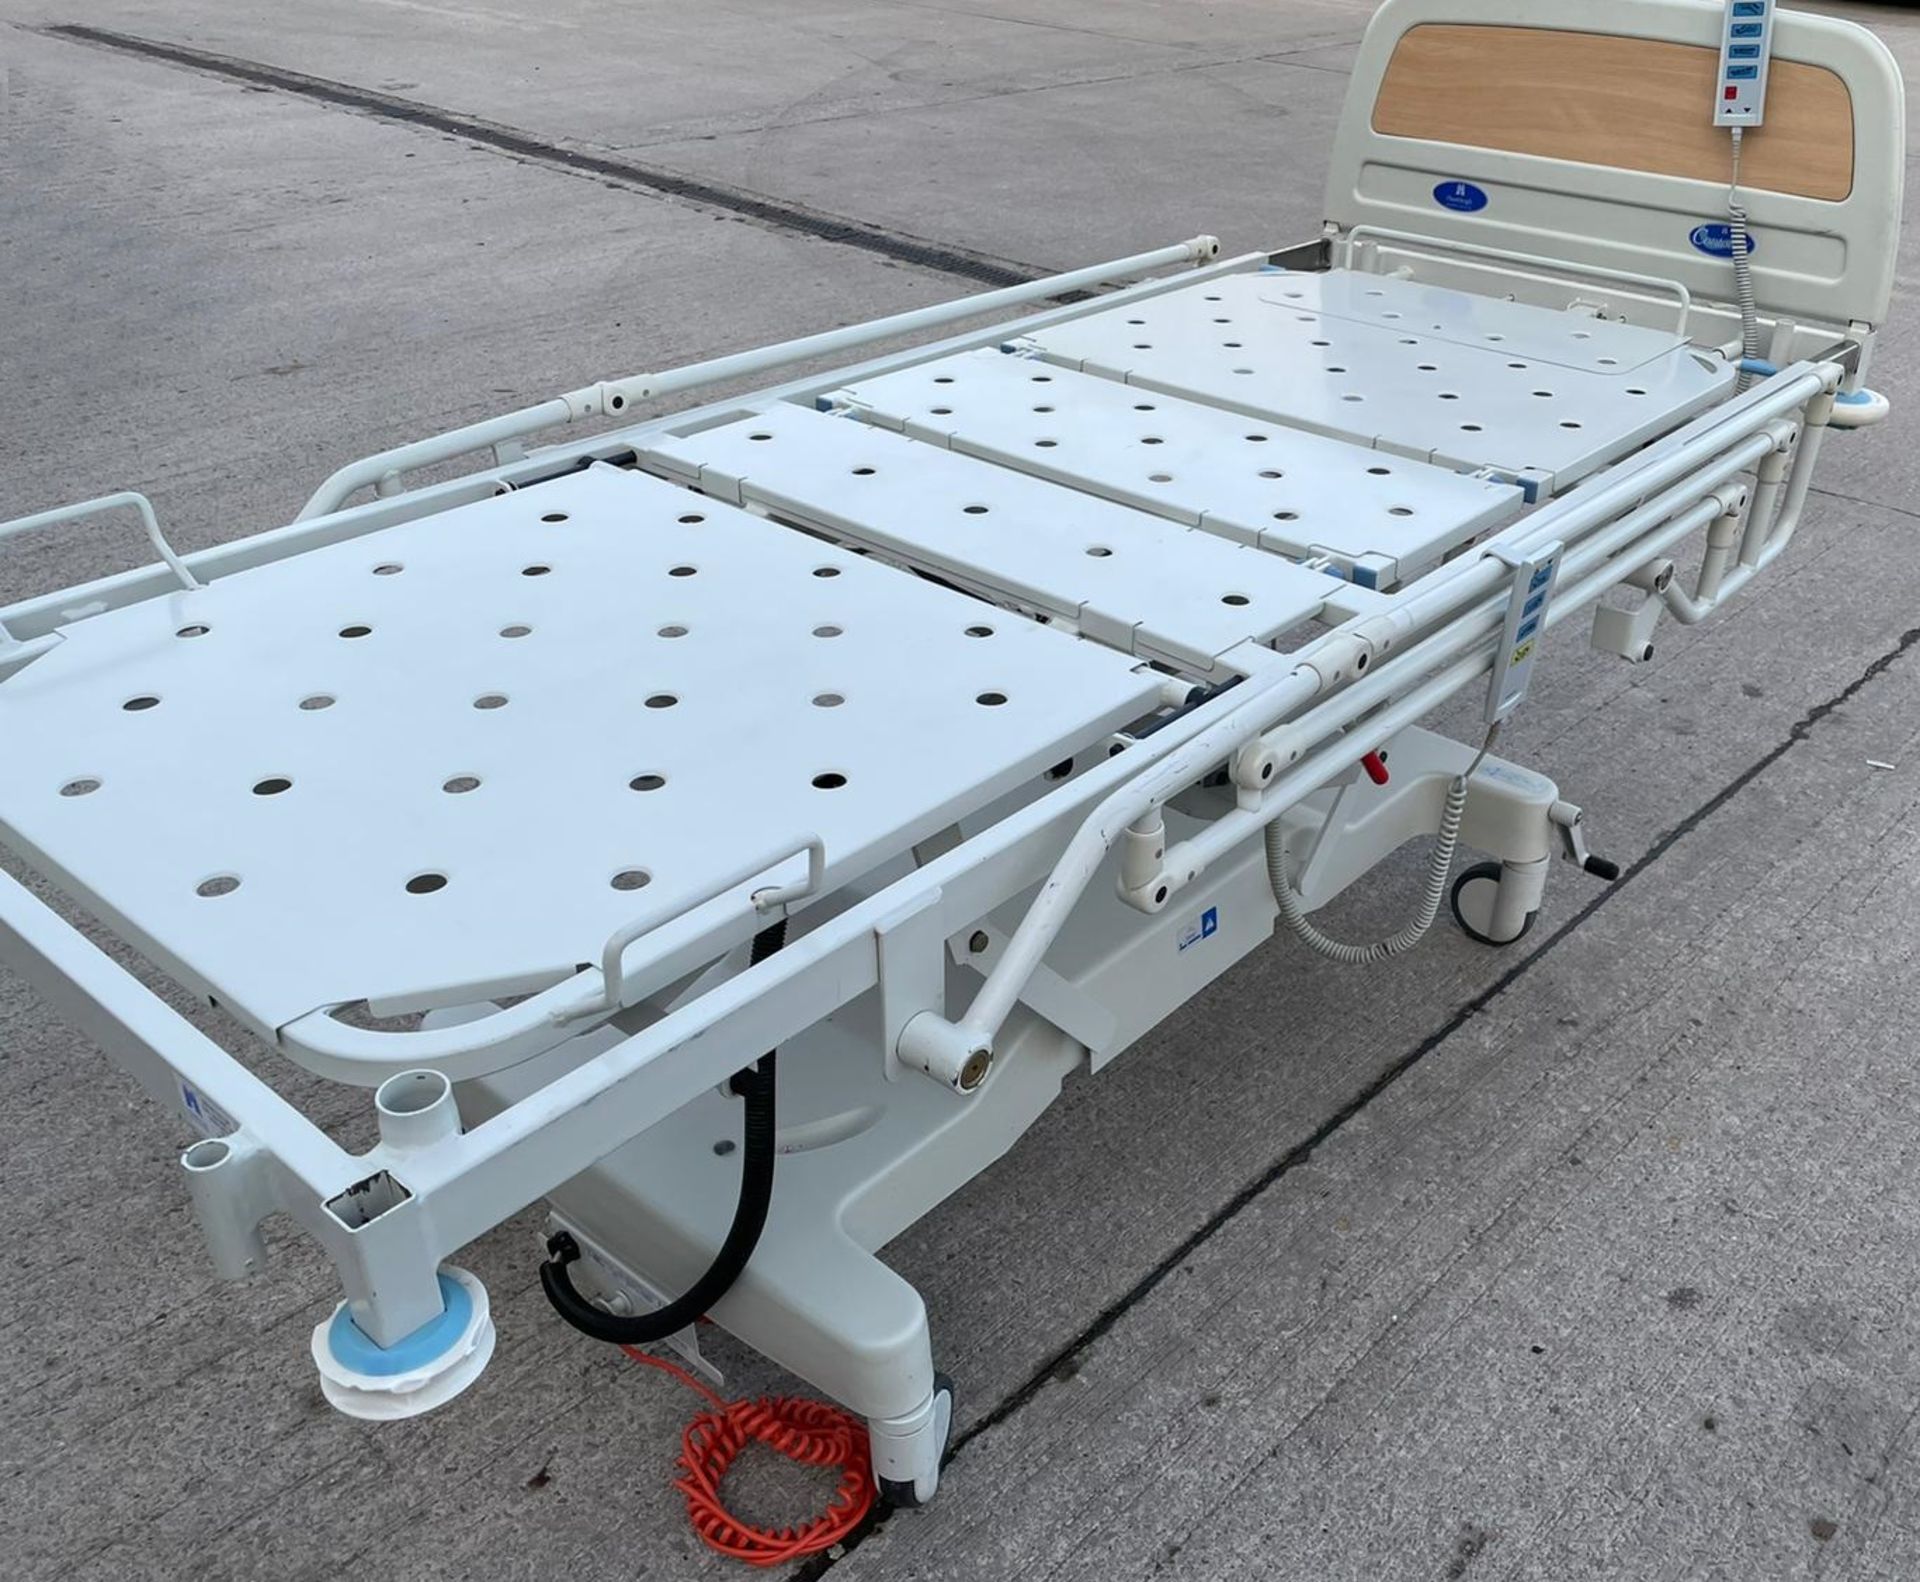 1 x Huntleigh CONTOURA Electric Hospital Bed - Features Rise/Fall 3-Way Profiling, Side Rails, - Image 7 of 8